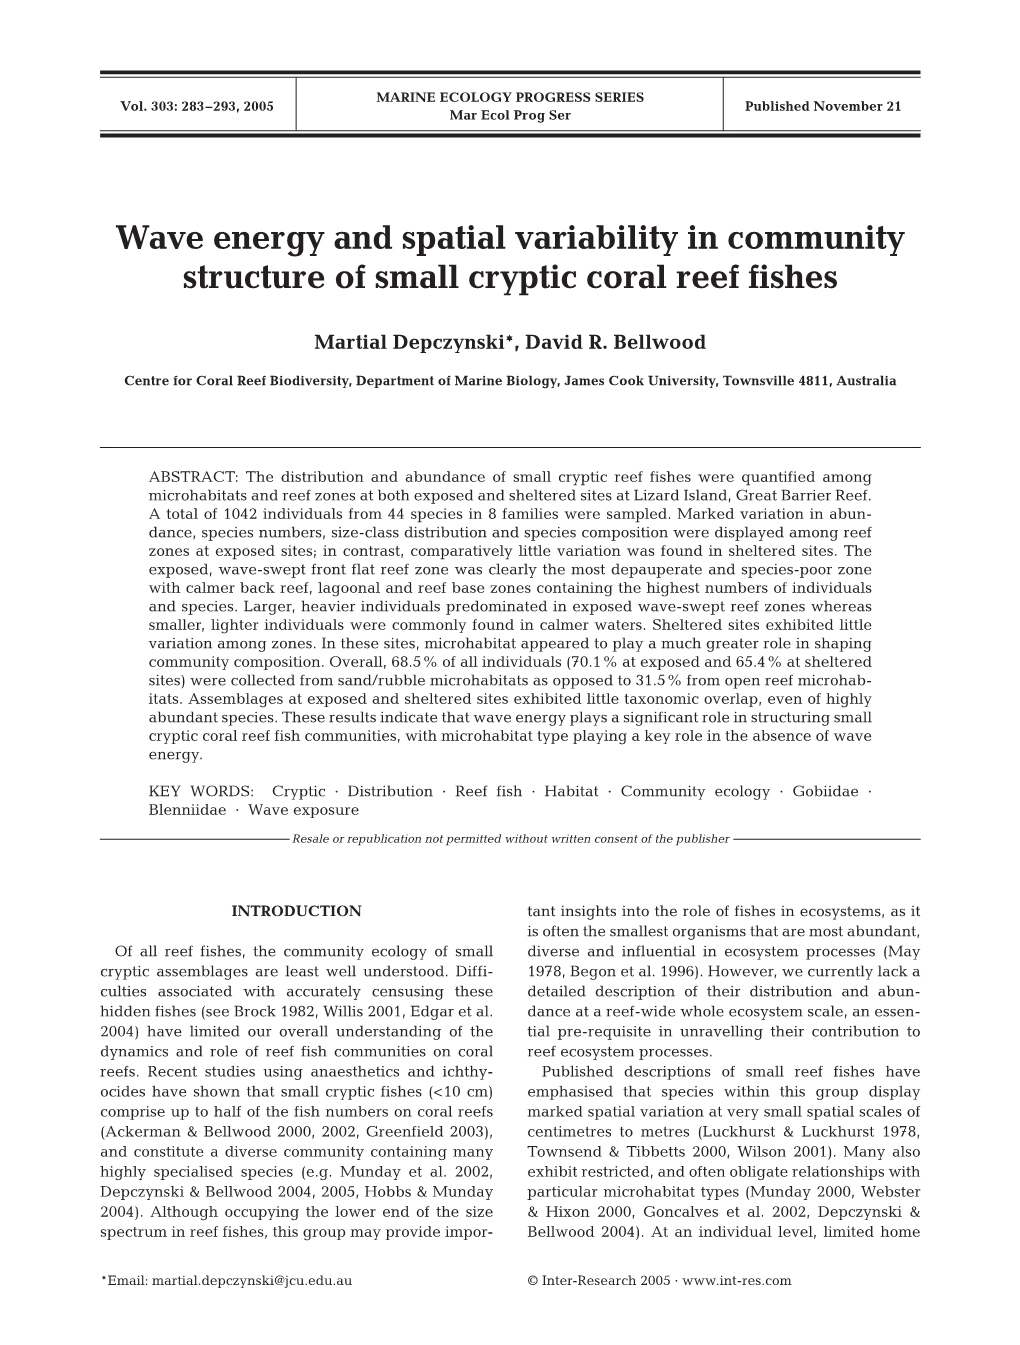 Wave Energy and Spatial Variability in Community Structure of Small Cryptic Coral Reef Fishes